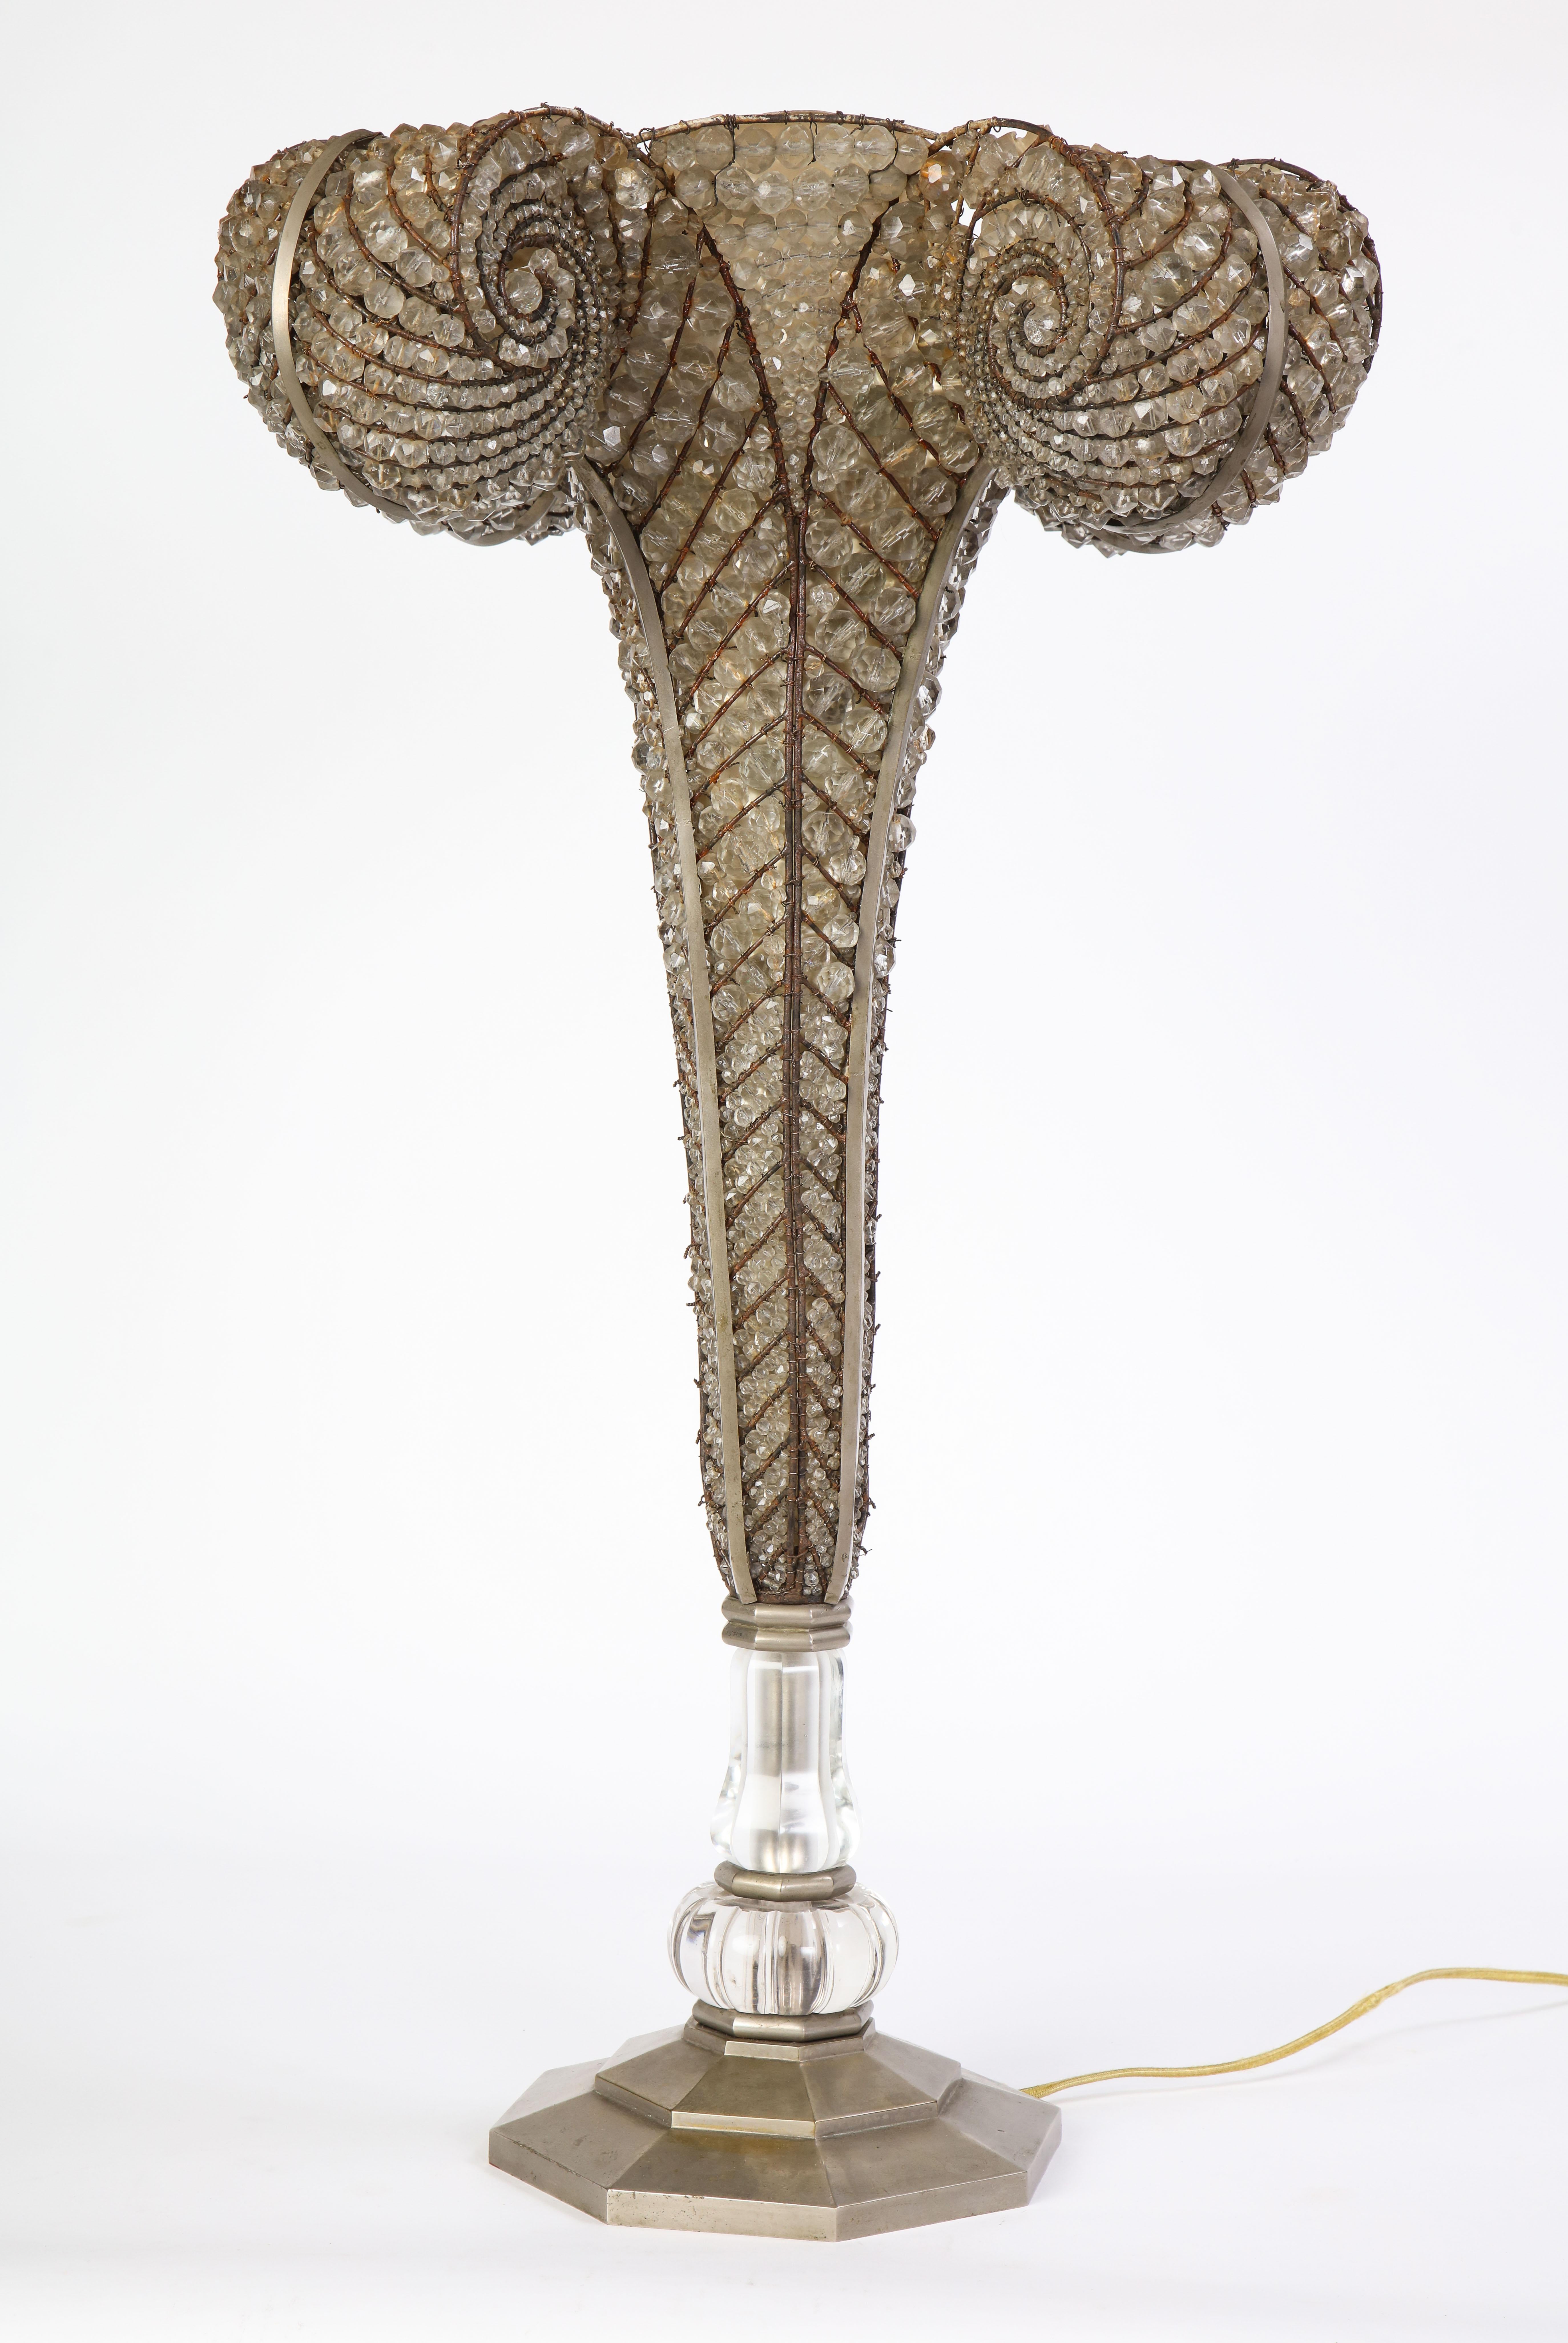 French Beaded Glass Table Lamp, Attributed To Maison Bagues, Circa 1925 For Sale 5